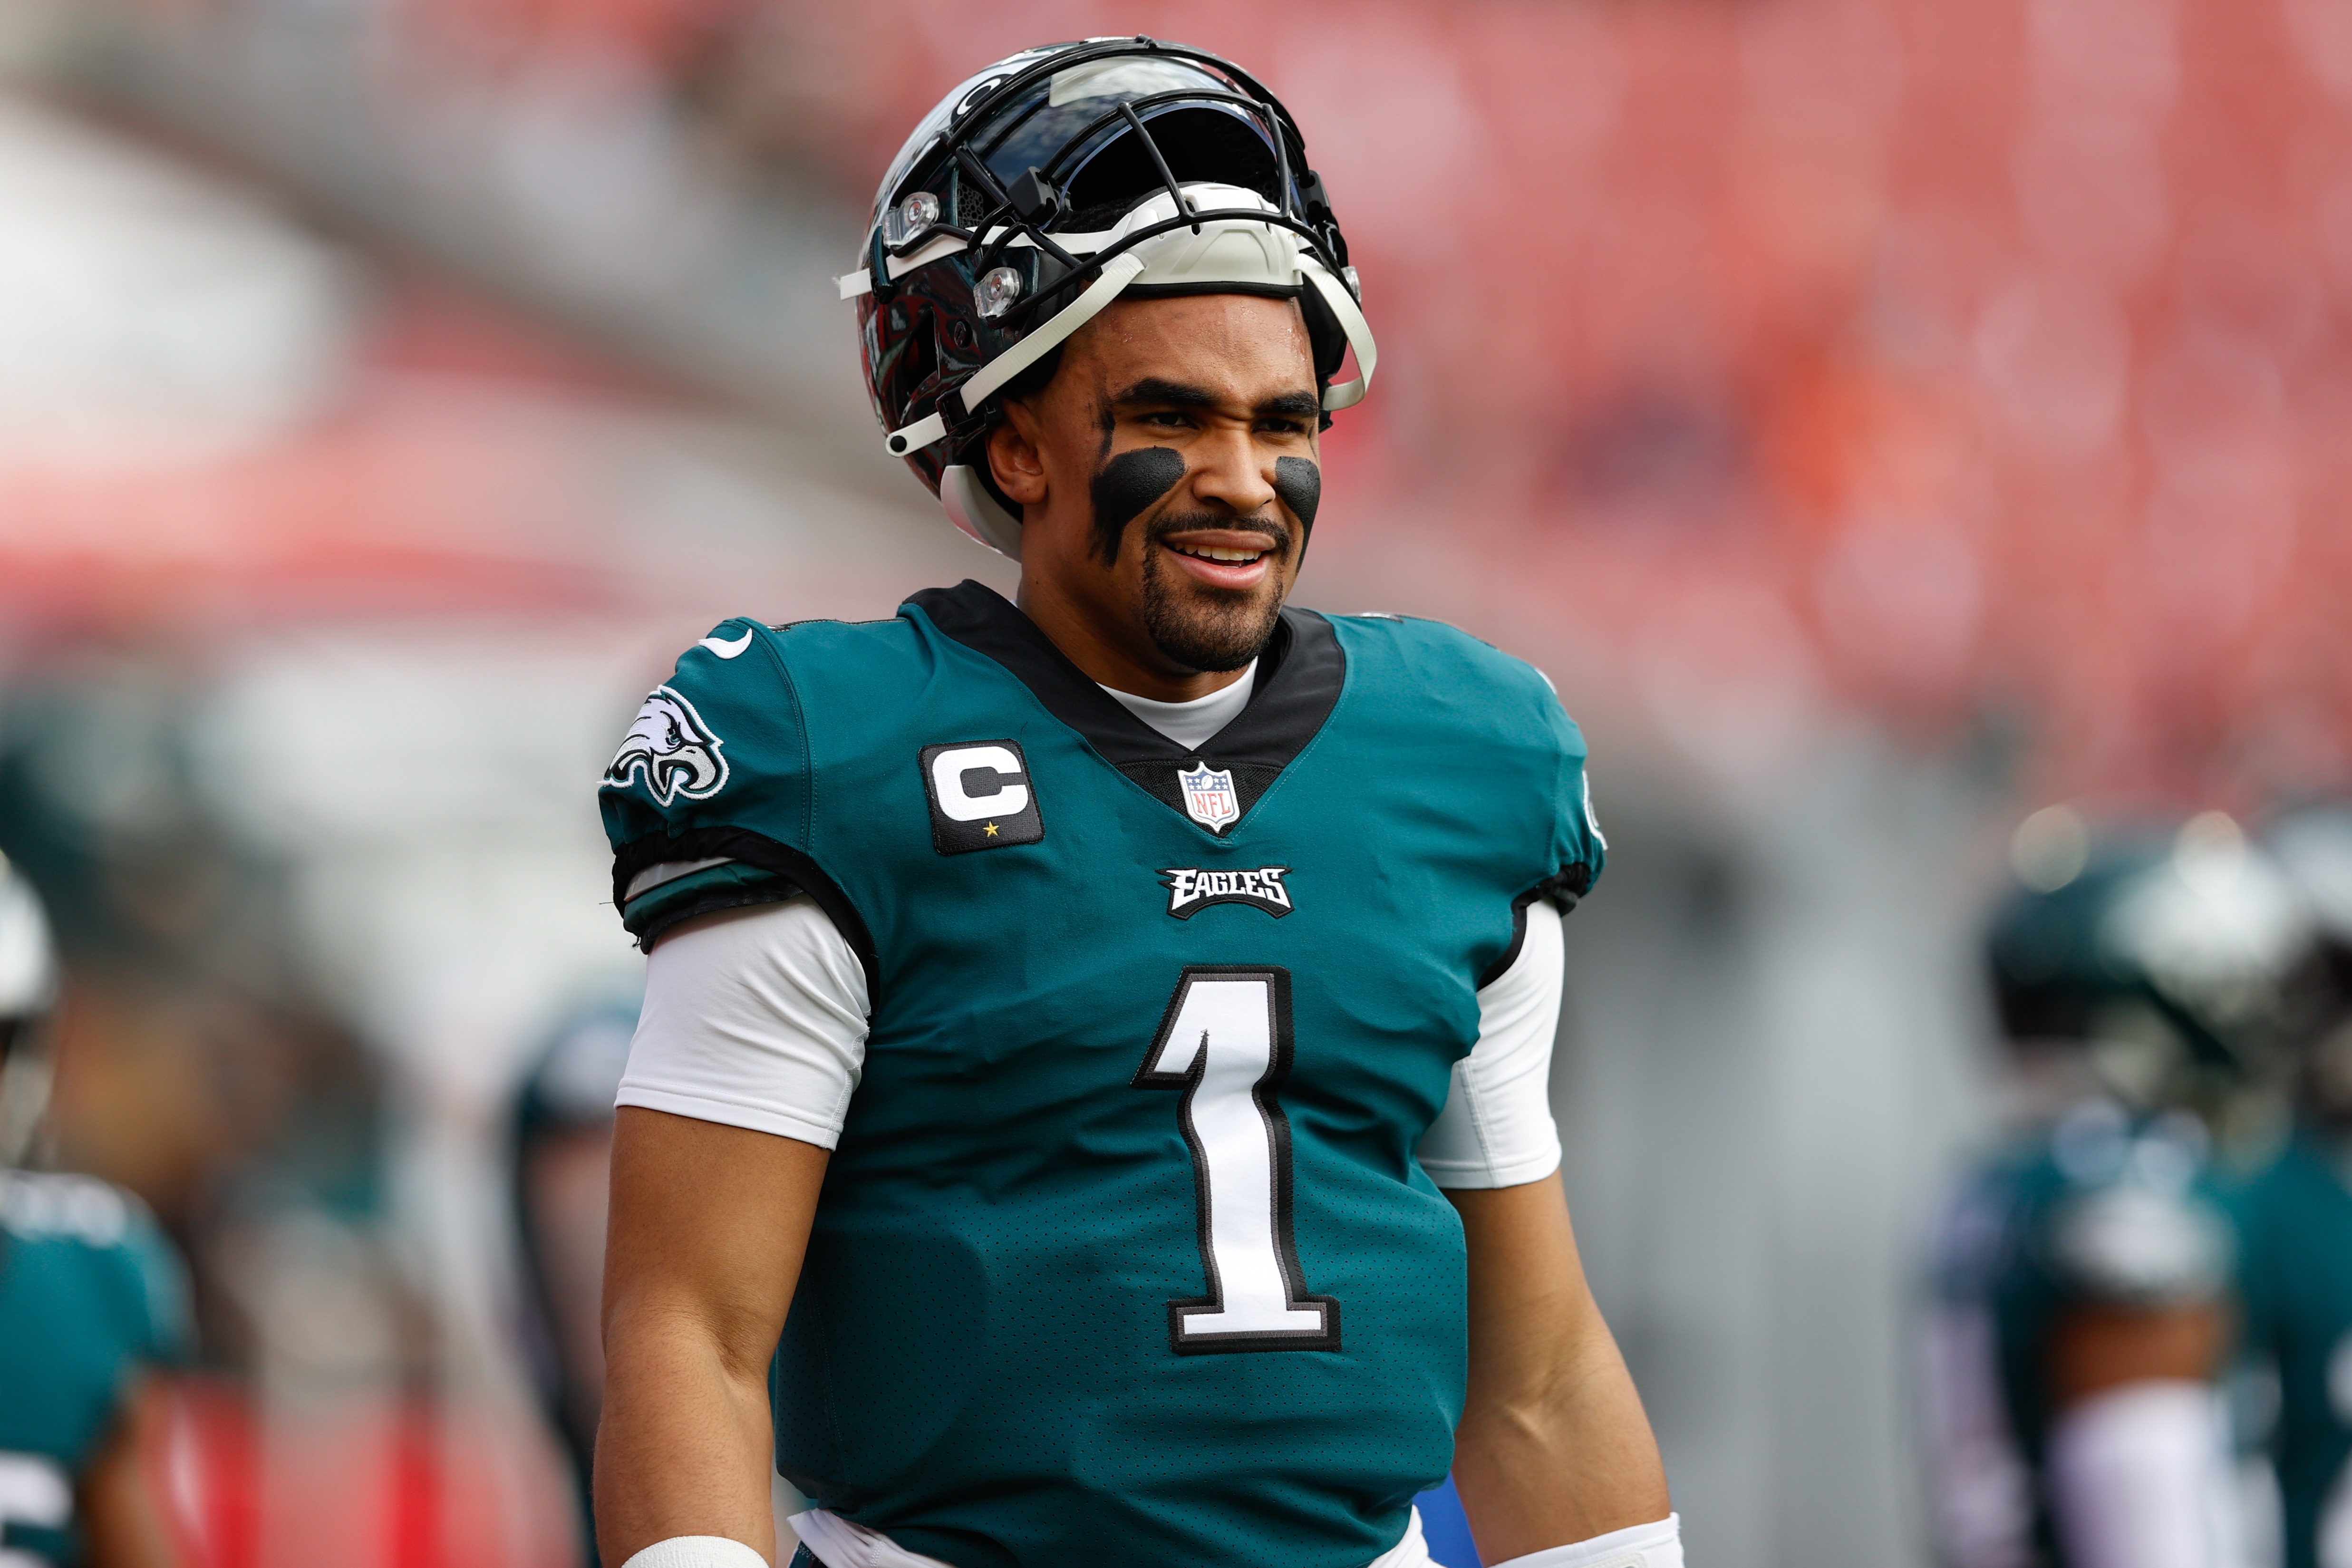 Philadelphia Eagles quarterback Jalen Hurts (1) looks on prior to a game against the Tampa Bay Buccaneers in a NFC Wild Card playoff football game at Raymond James Stadium.